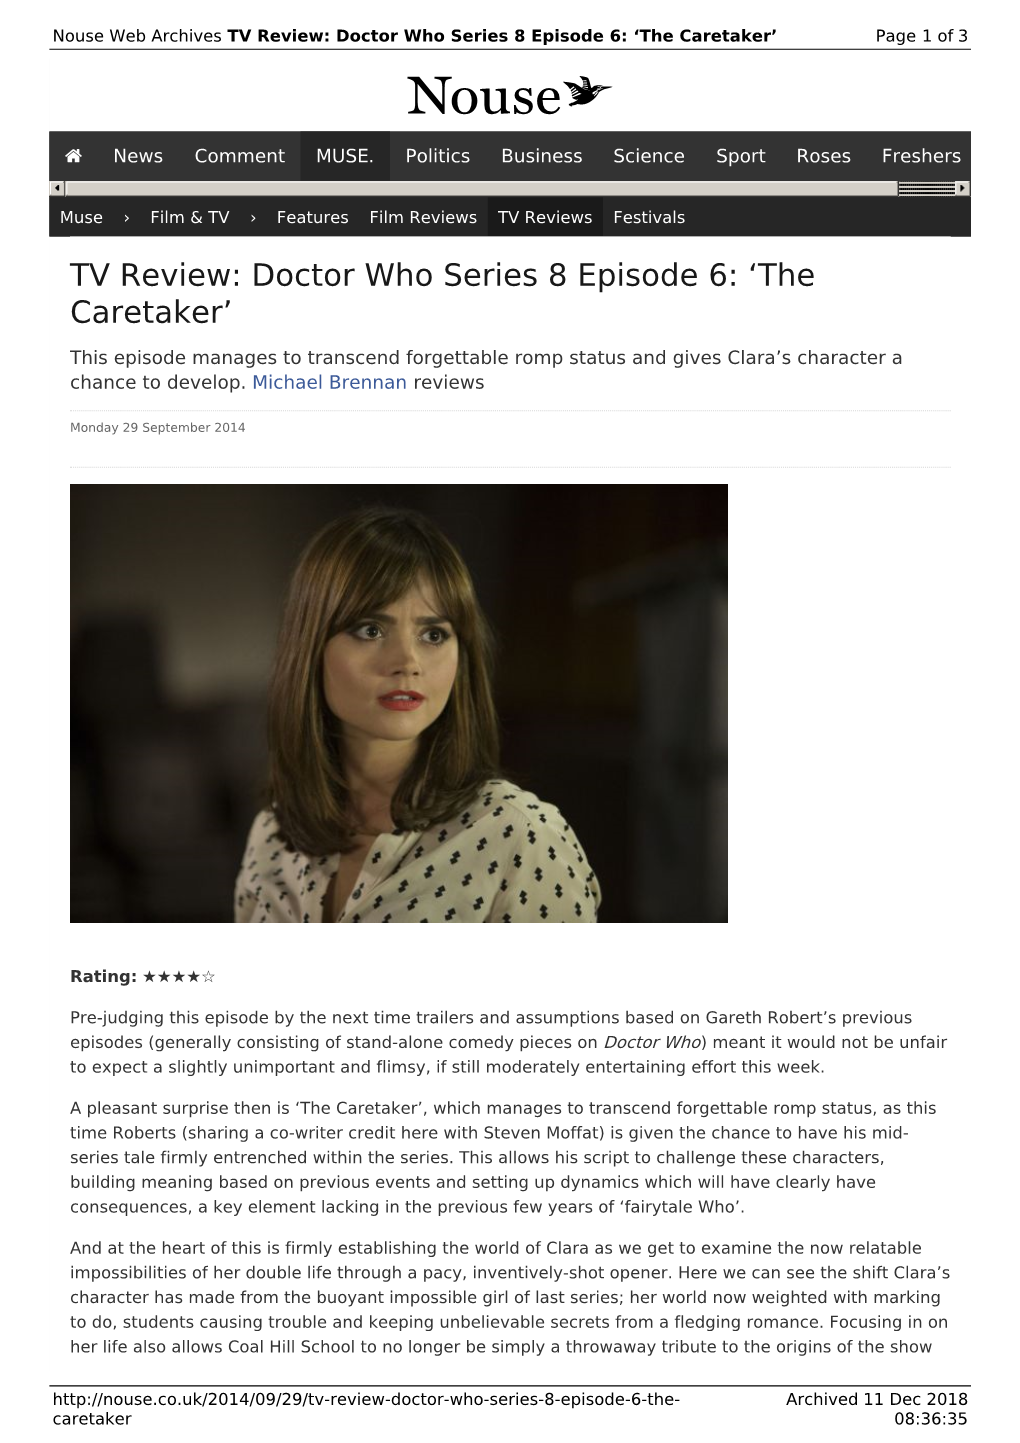 TV Review: Doctor Who Series 8 Episode 6: 'The Caretaker' | Nouse